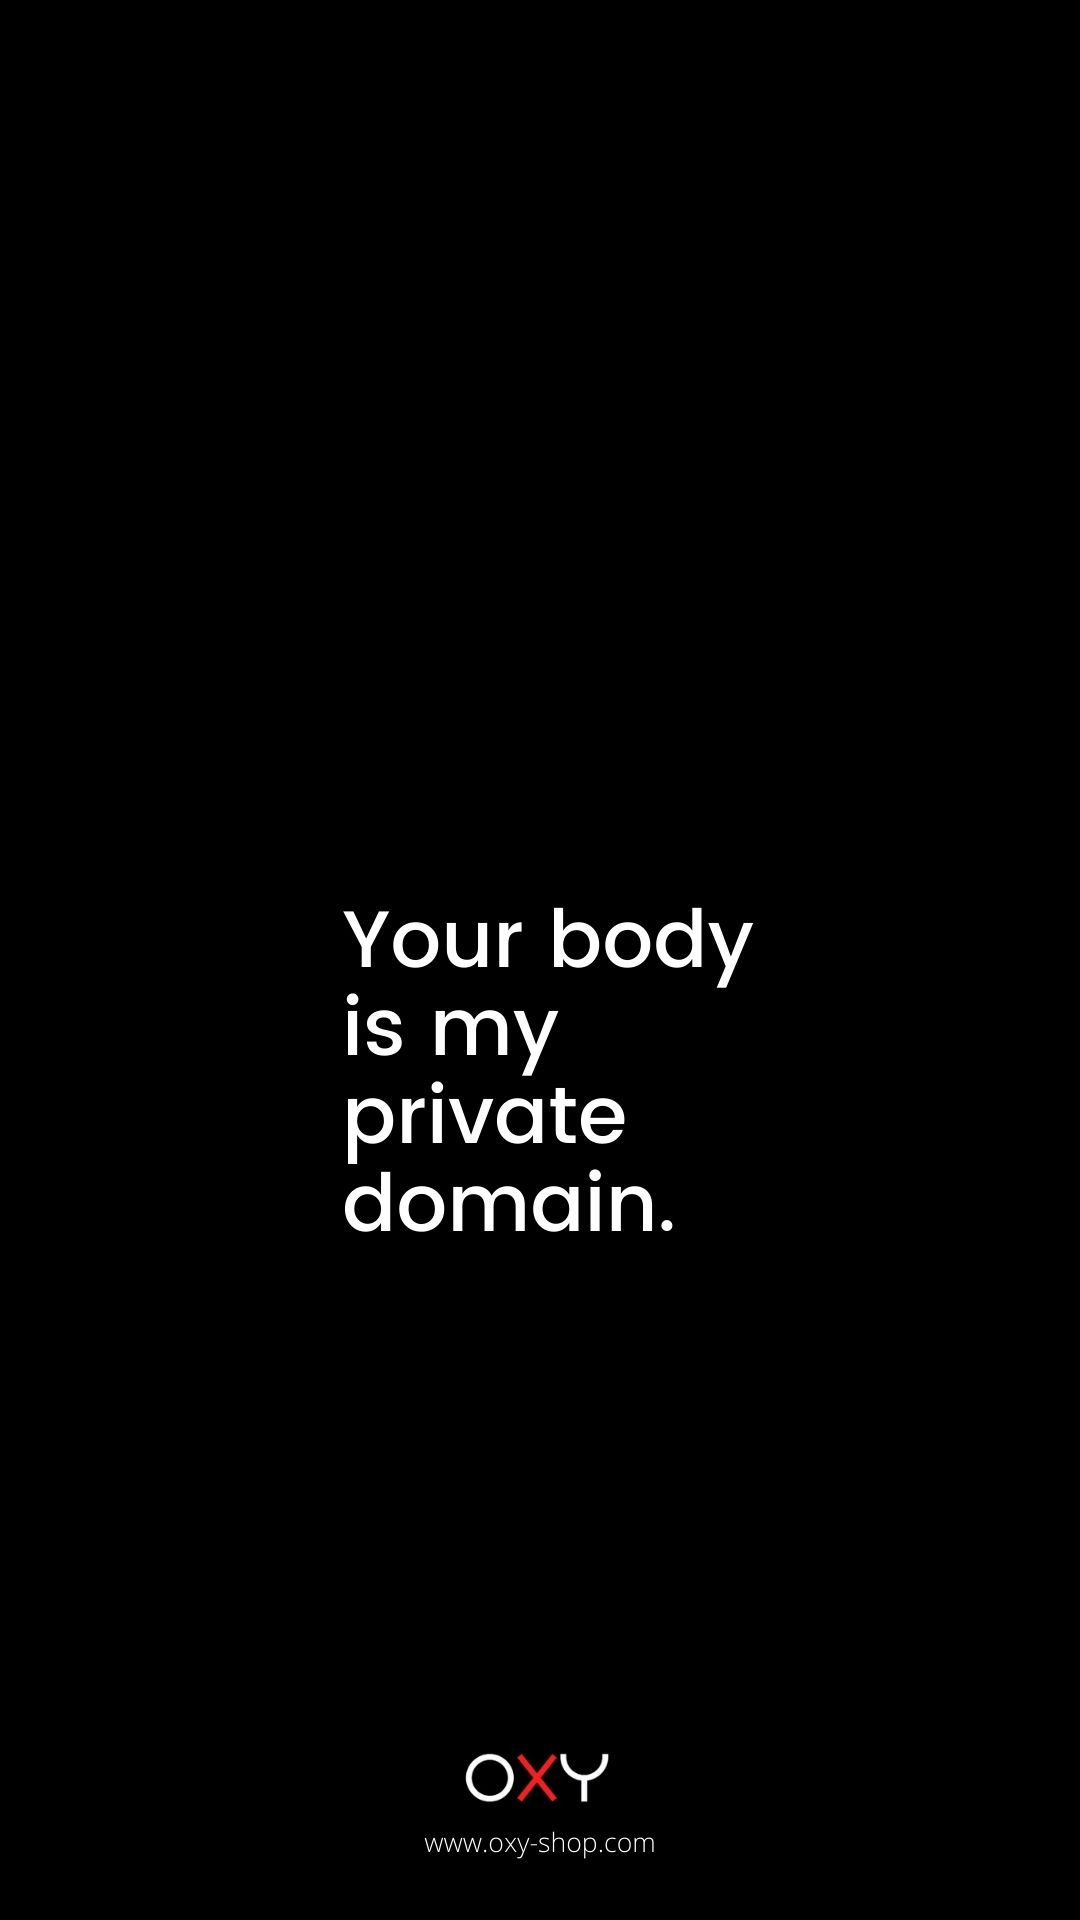 Your body is my private domain. - BDSM wallpaper